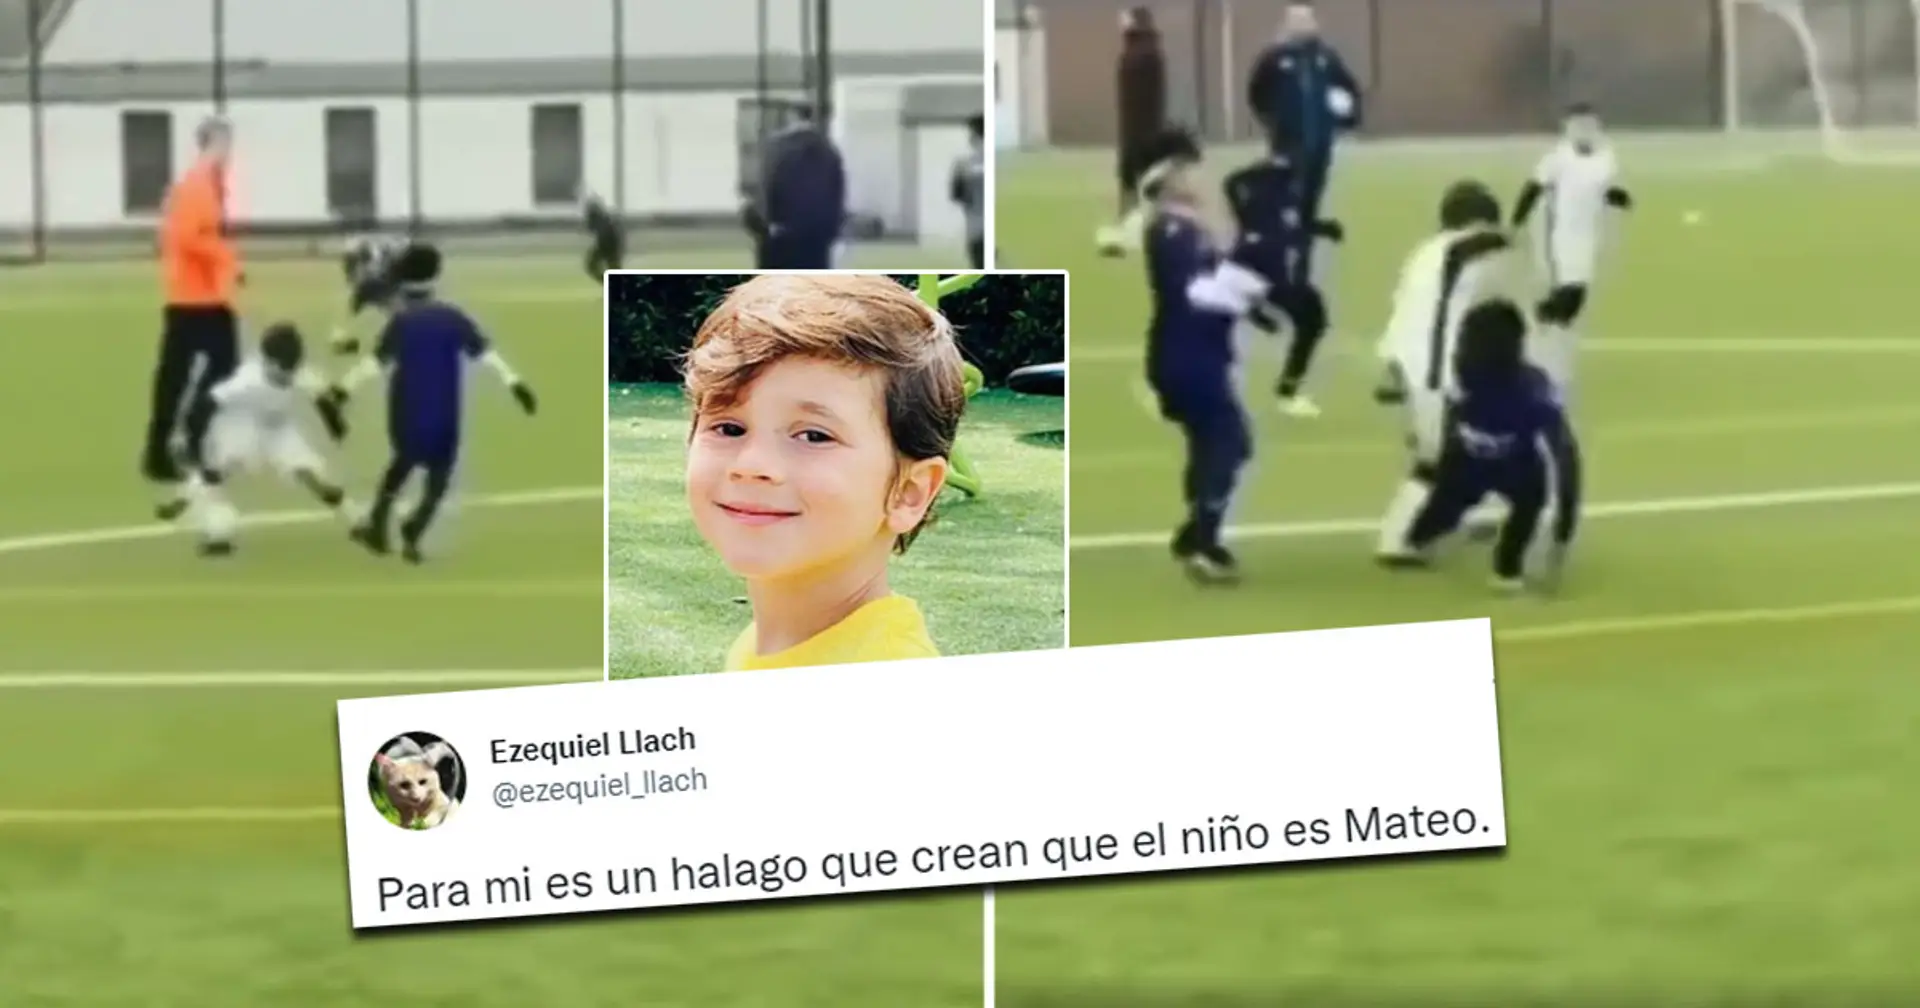 Kid wrongly identified as Mateo Messi goes viral among Barca fans with solo golazo - who is he actually?